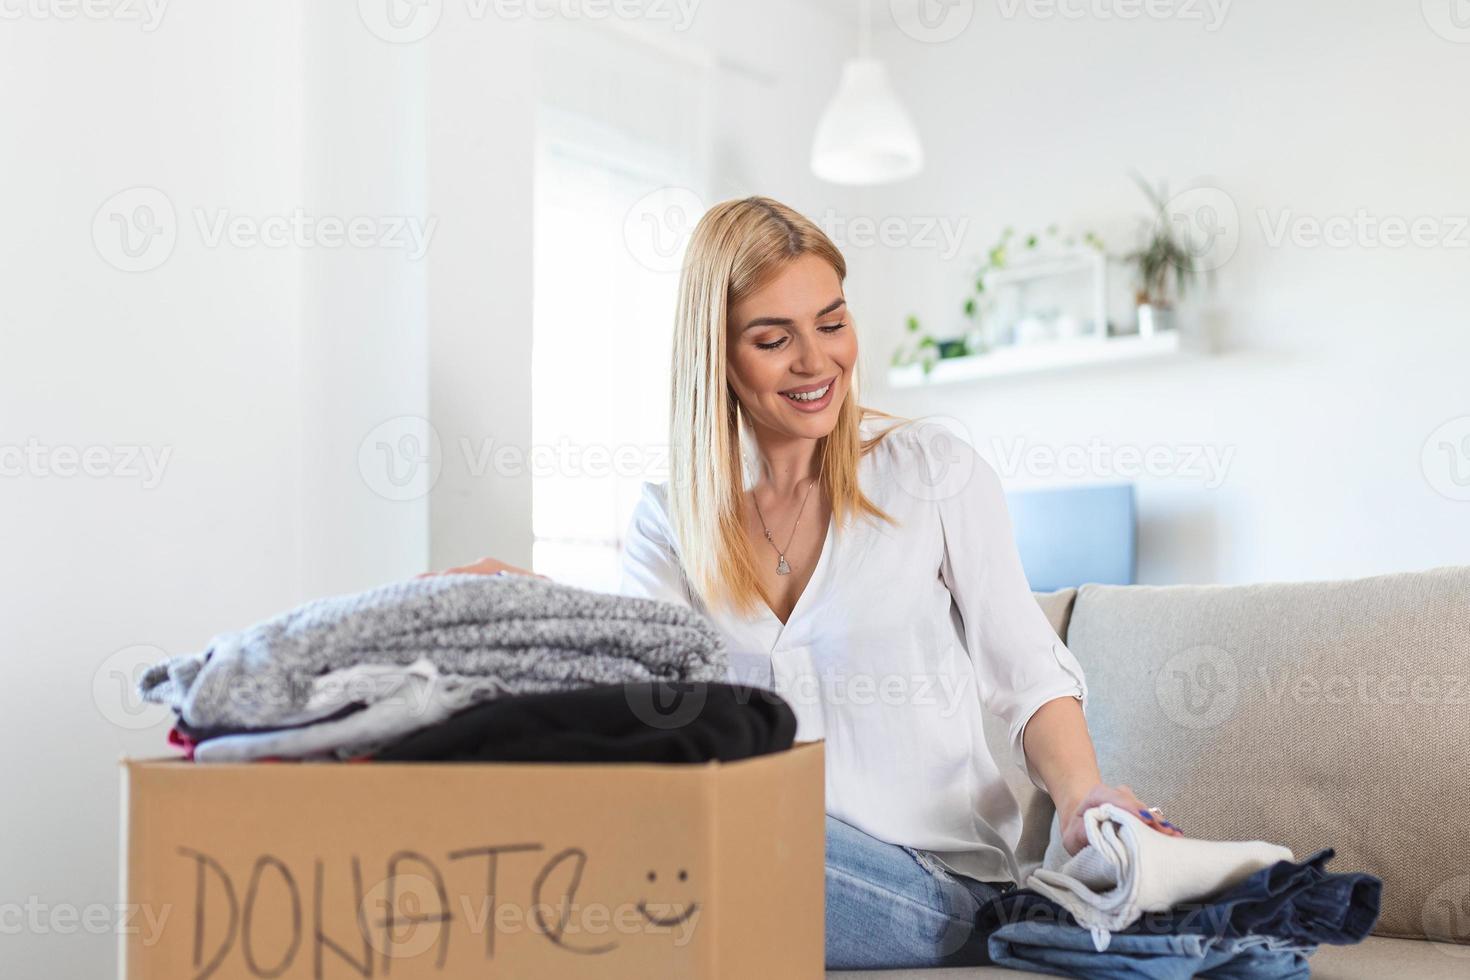 Happy young woman sit on couch stuck clothes in donation box at home, caring biracial female volunteer put apparel in carton package, donate to needy people, reuse, recycle concept photo